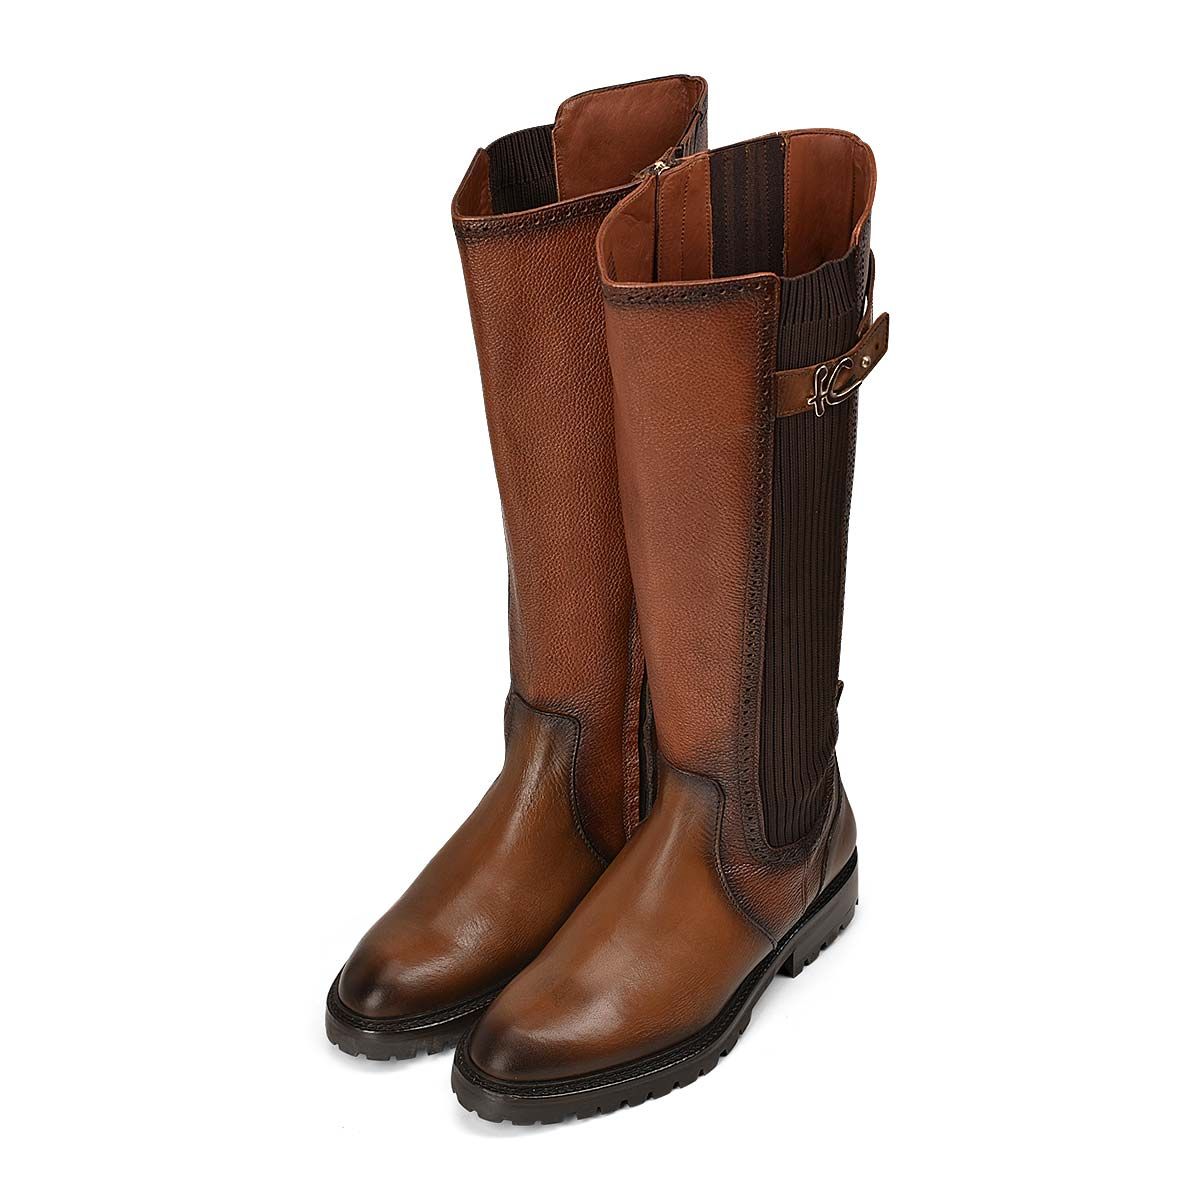 94TTSRS - Franco Cuadra brown casual leather riding boots for women.-Kuet.us